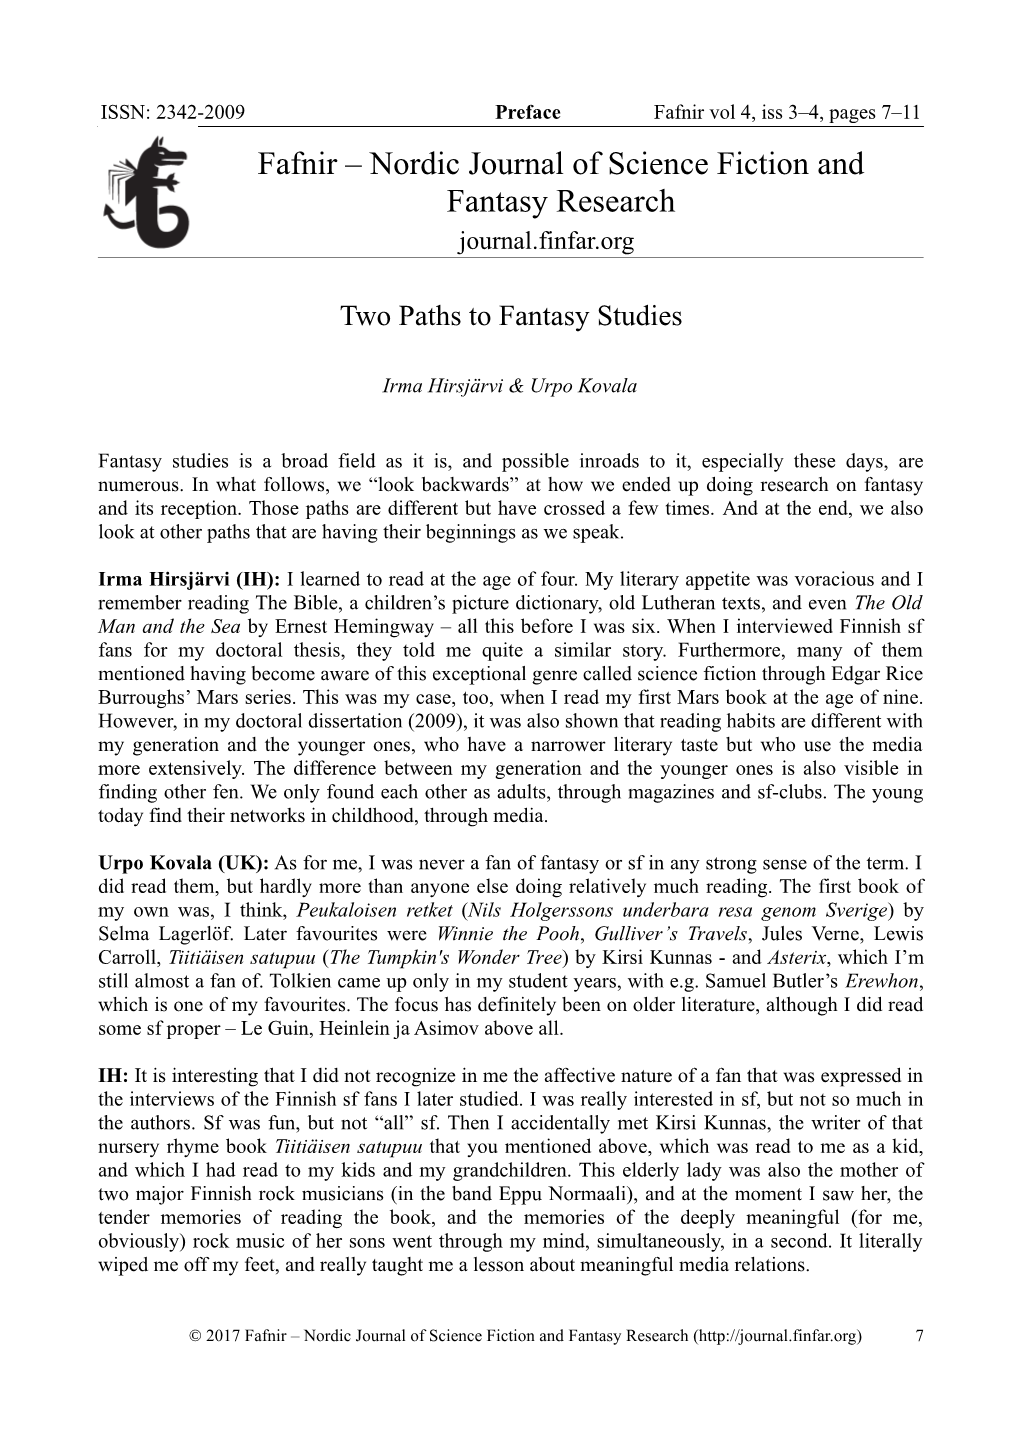 Fafnir – Nordic Journal of Science Fiction and Fantasy Research Journal.Finfar.Org